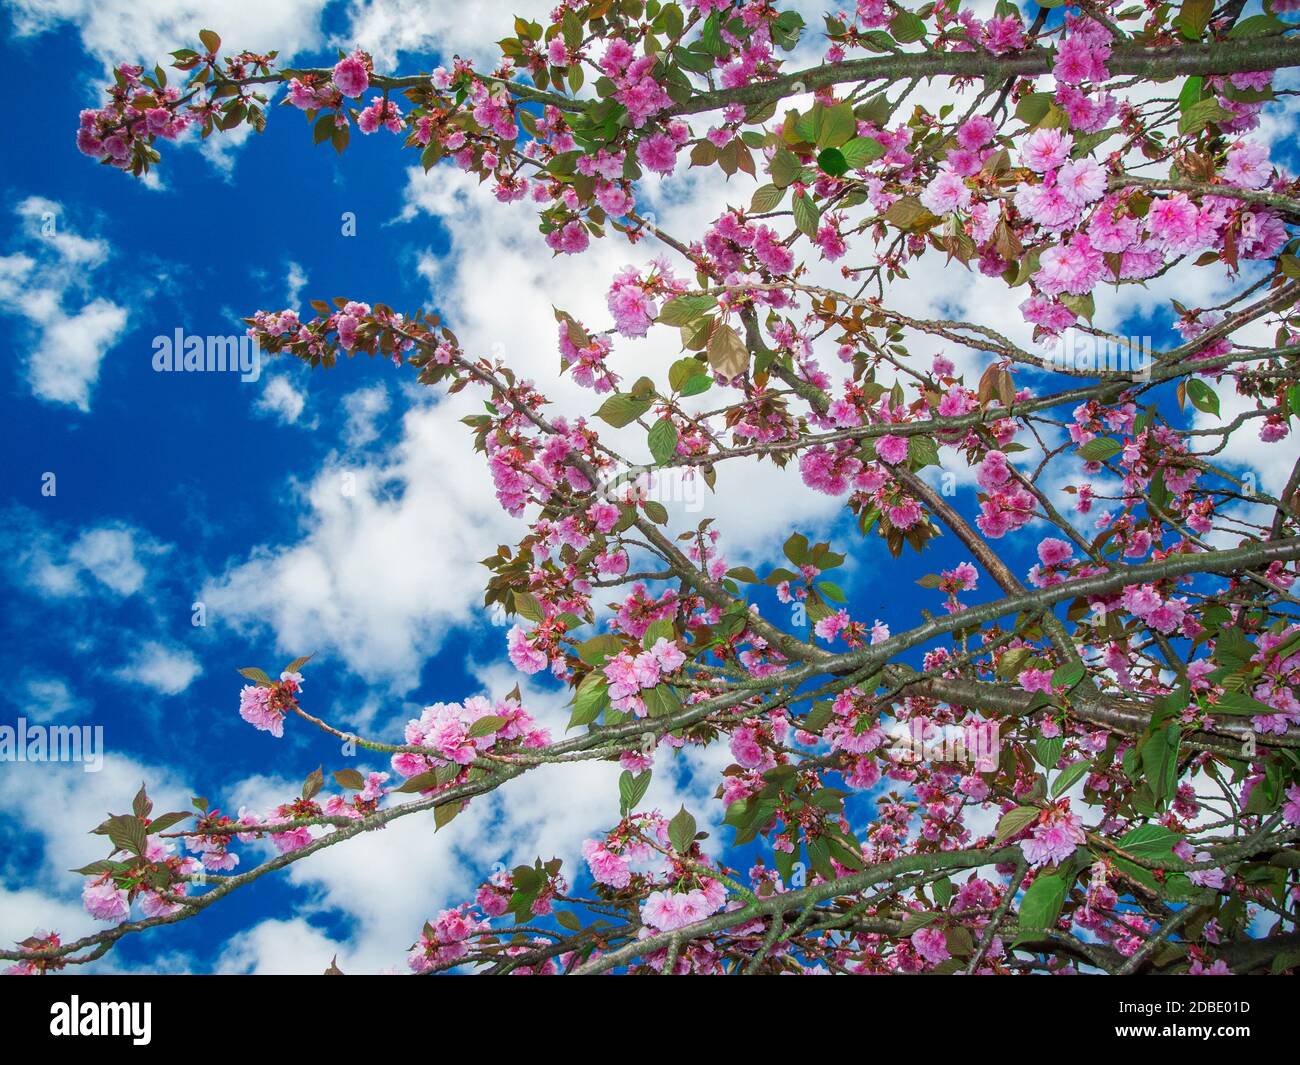 Low angle view of tree branches with cherry blossoms against a blue sky with white clouds in Brandenburg / Germany. Stock Photo